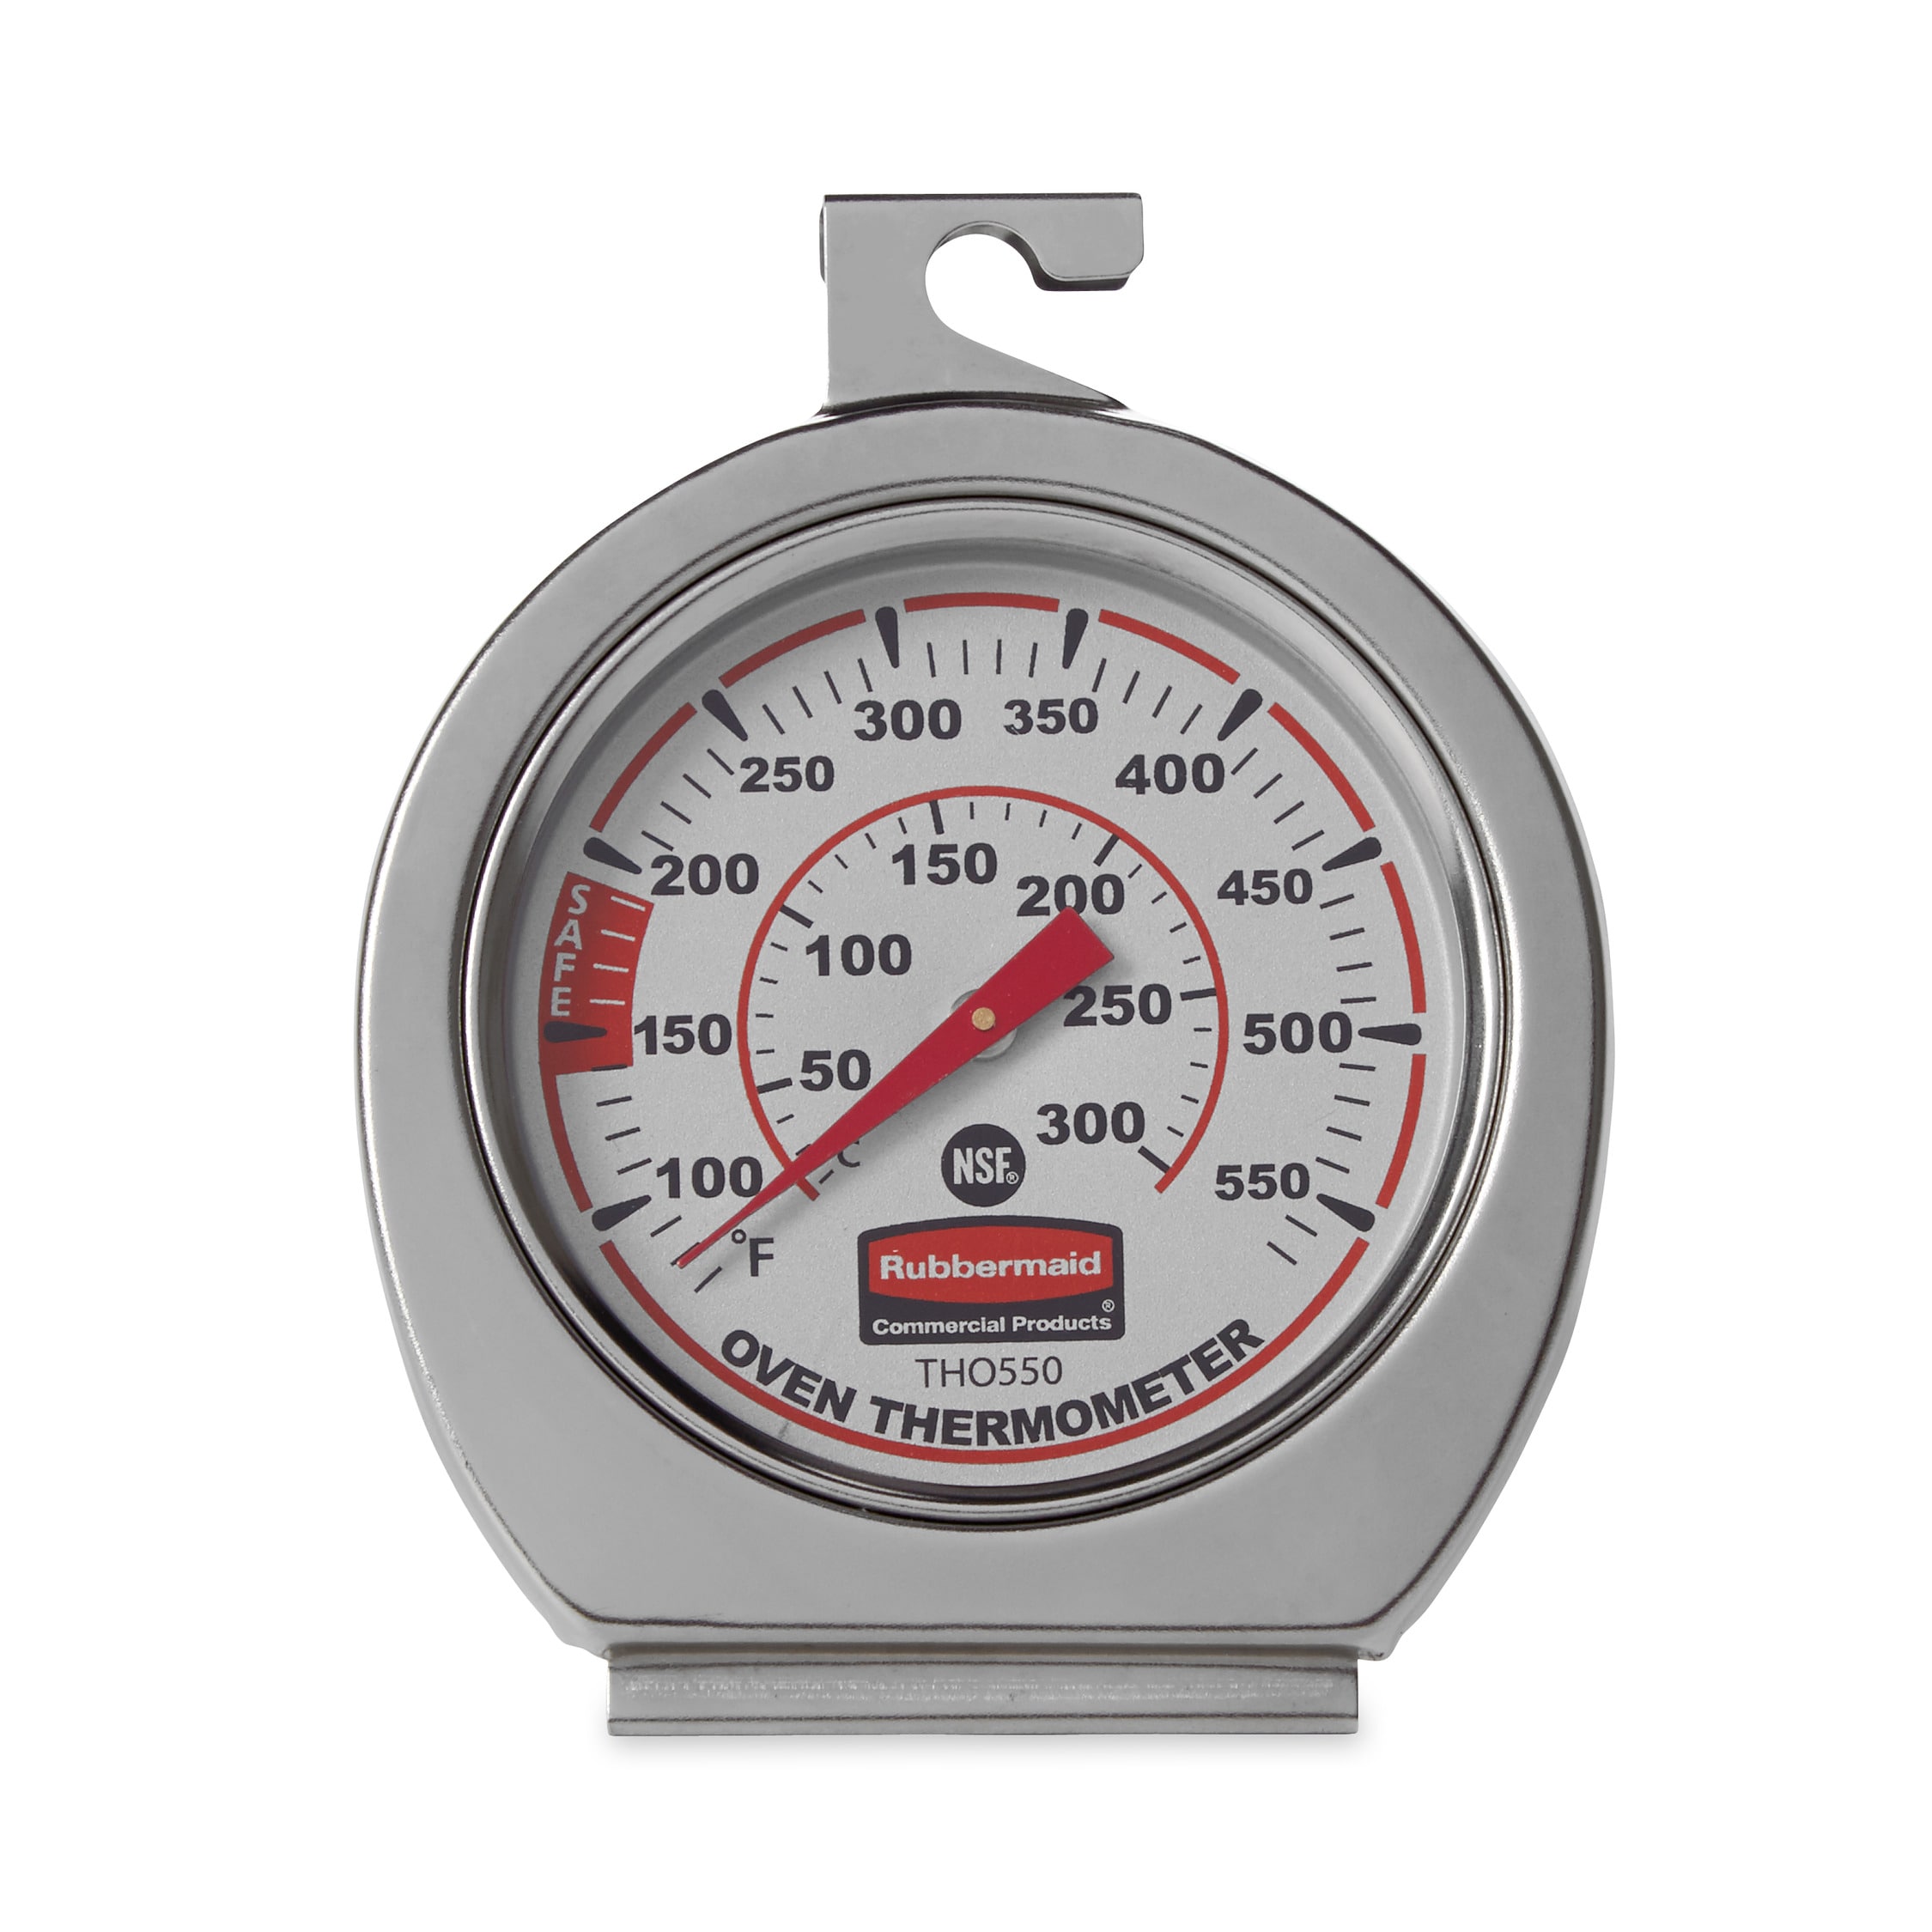 External Digital Oven Thermometer - The Boat Galley